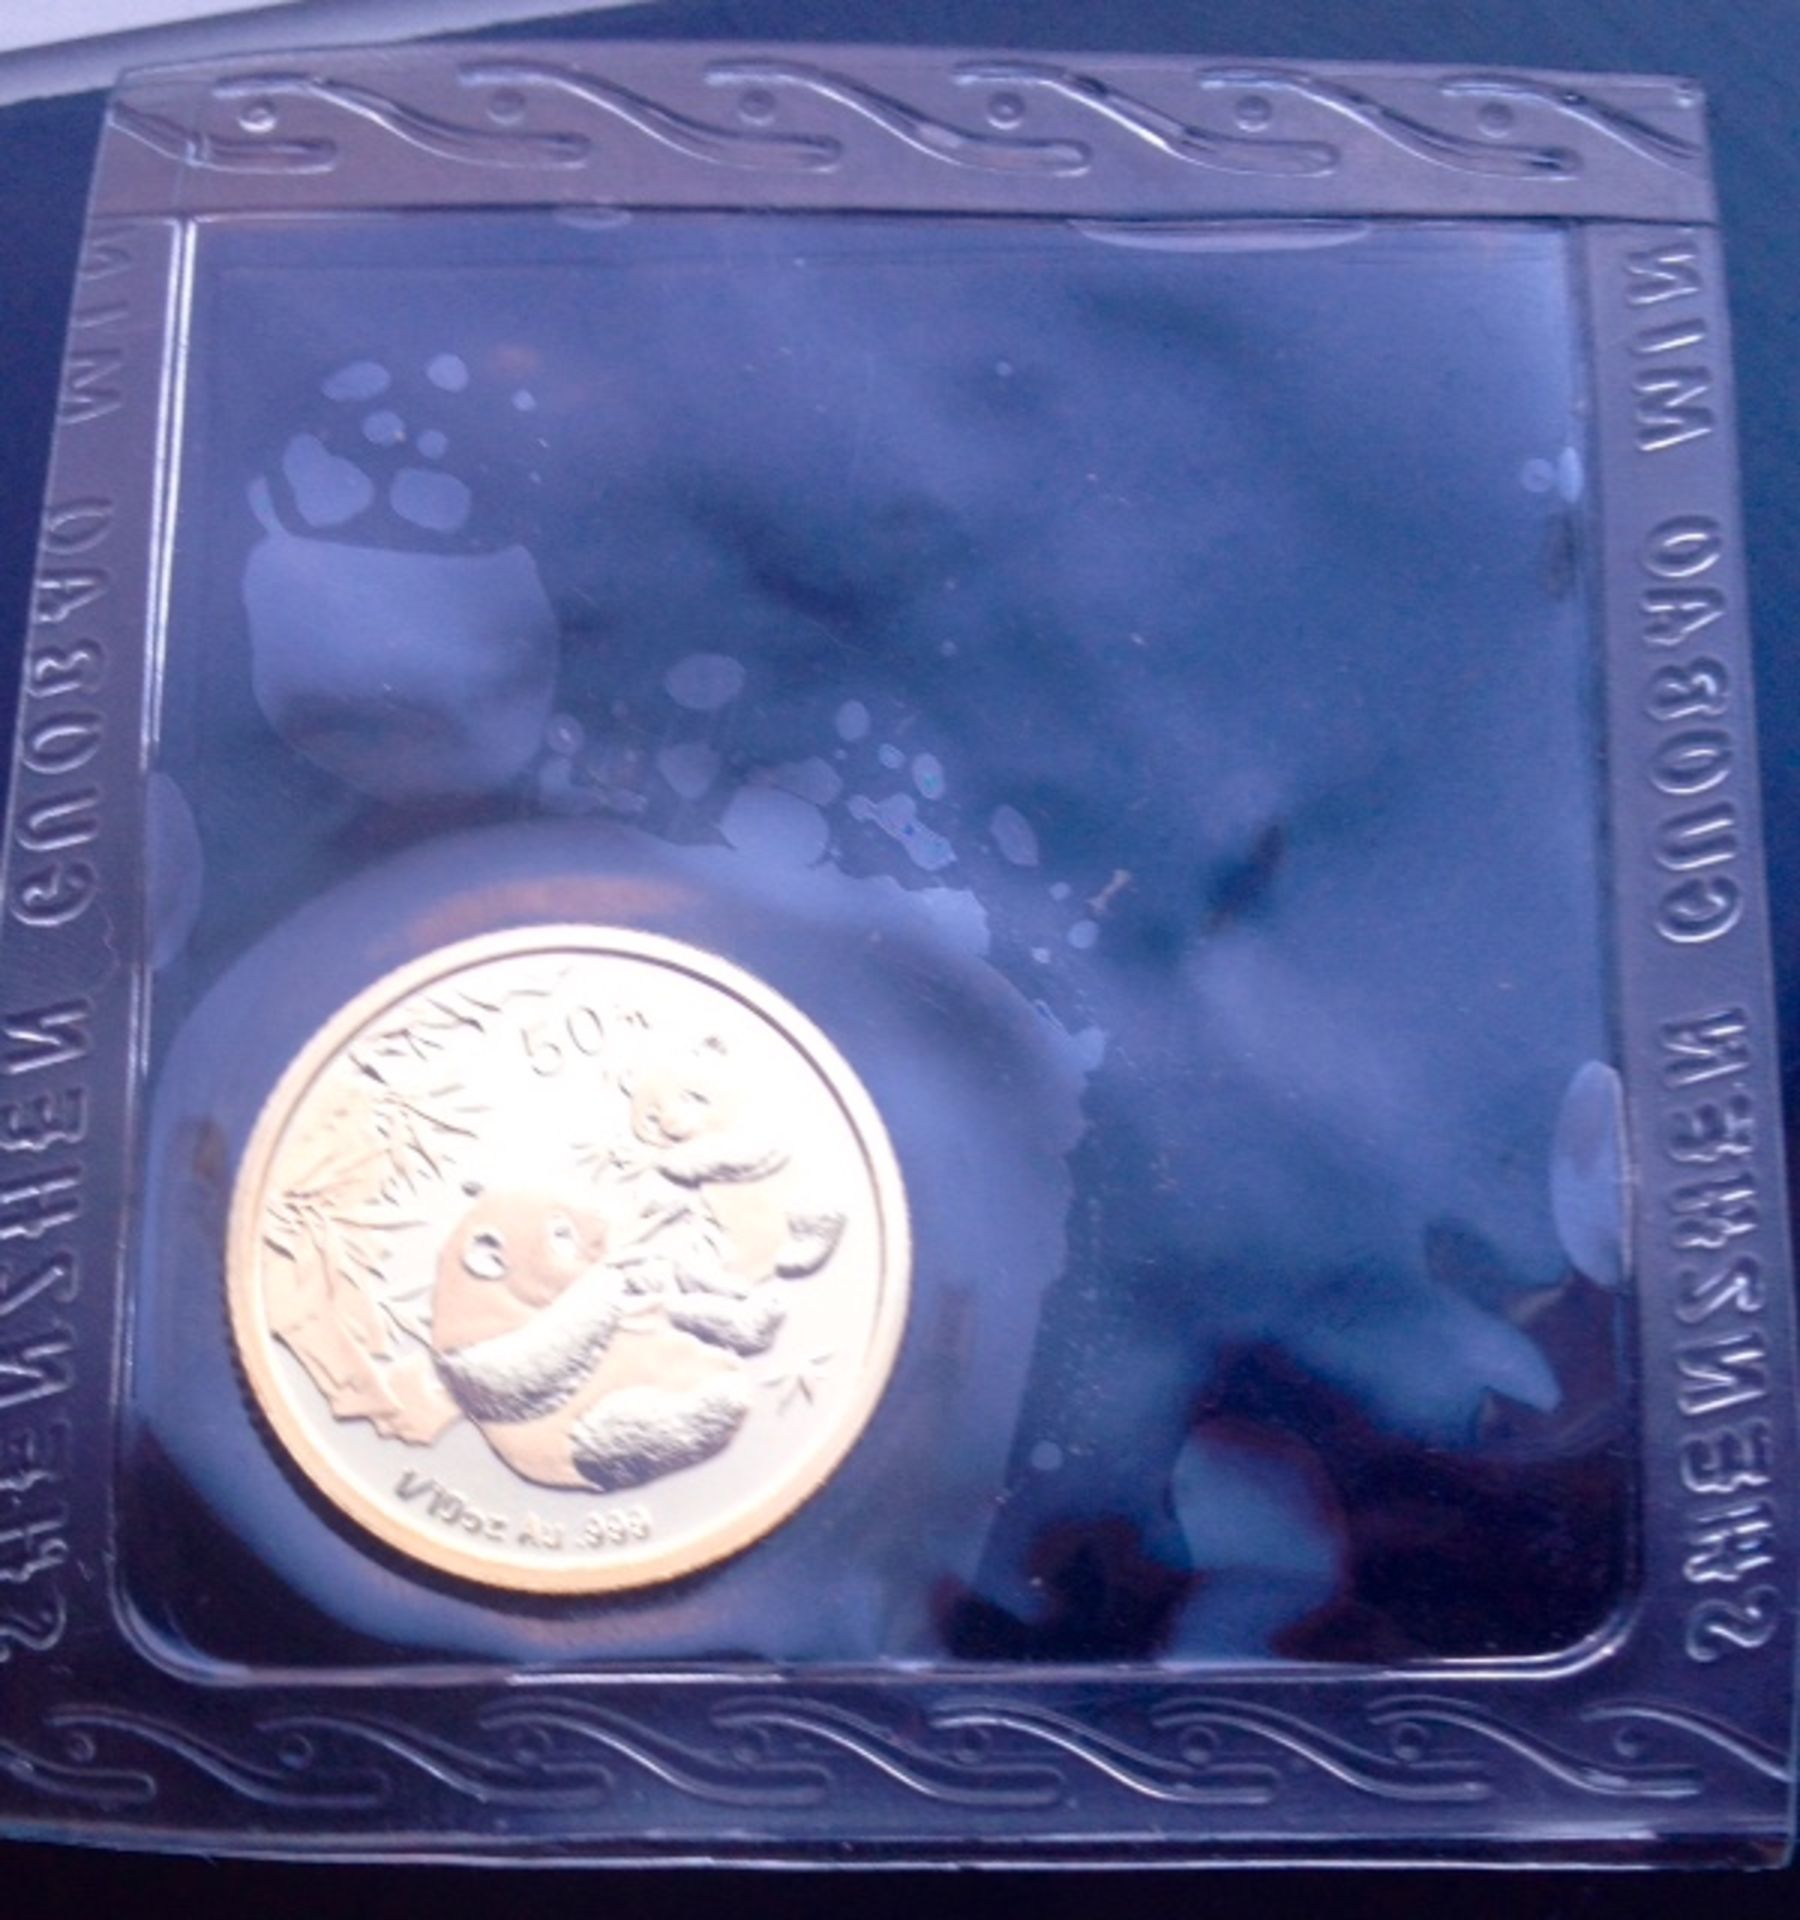 No Reserve Ultra rare collectors 2006 1/10oz Gold 50 yuan Chinese Coin fully Sealed - Image 2 of 4